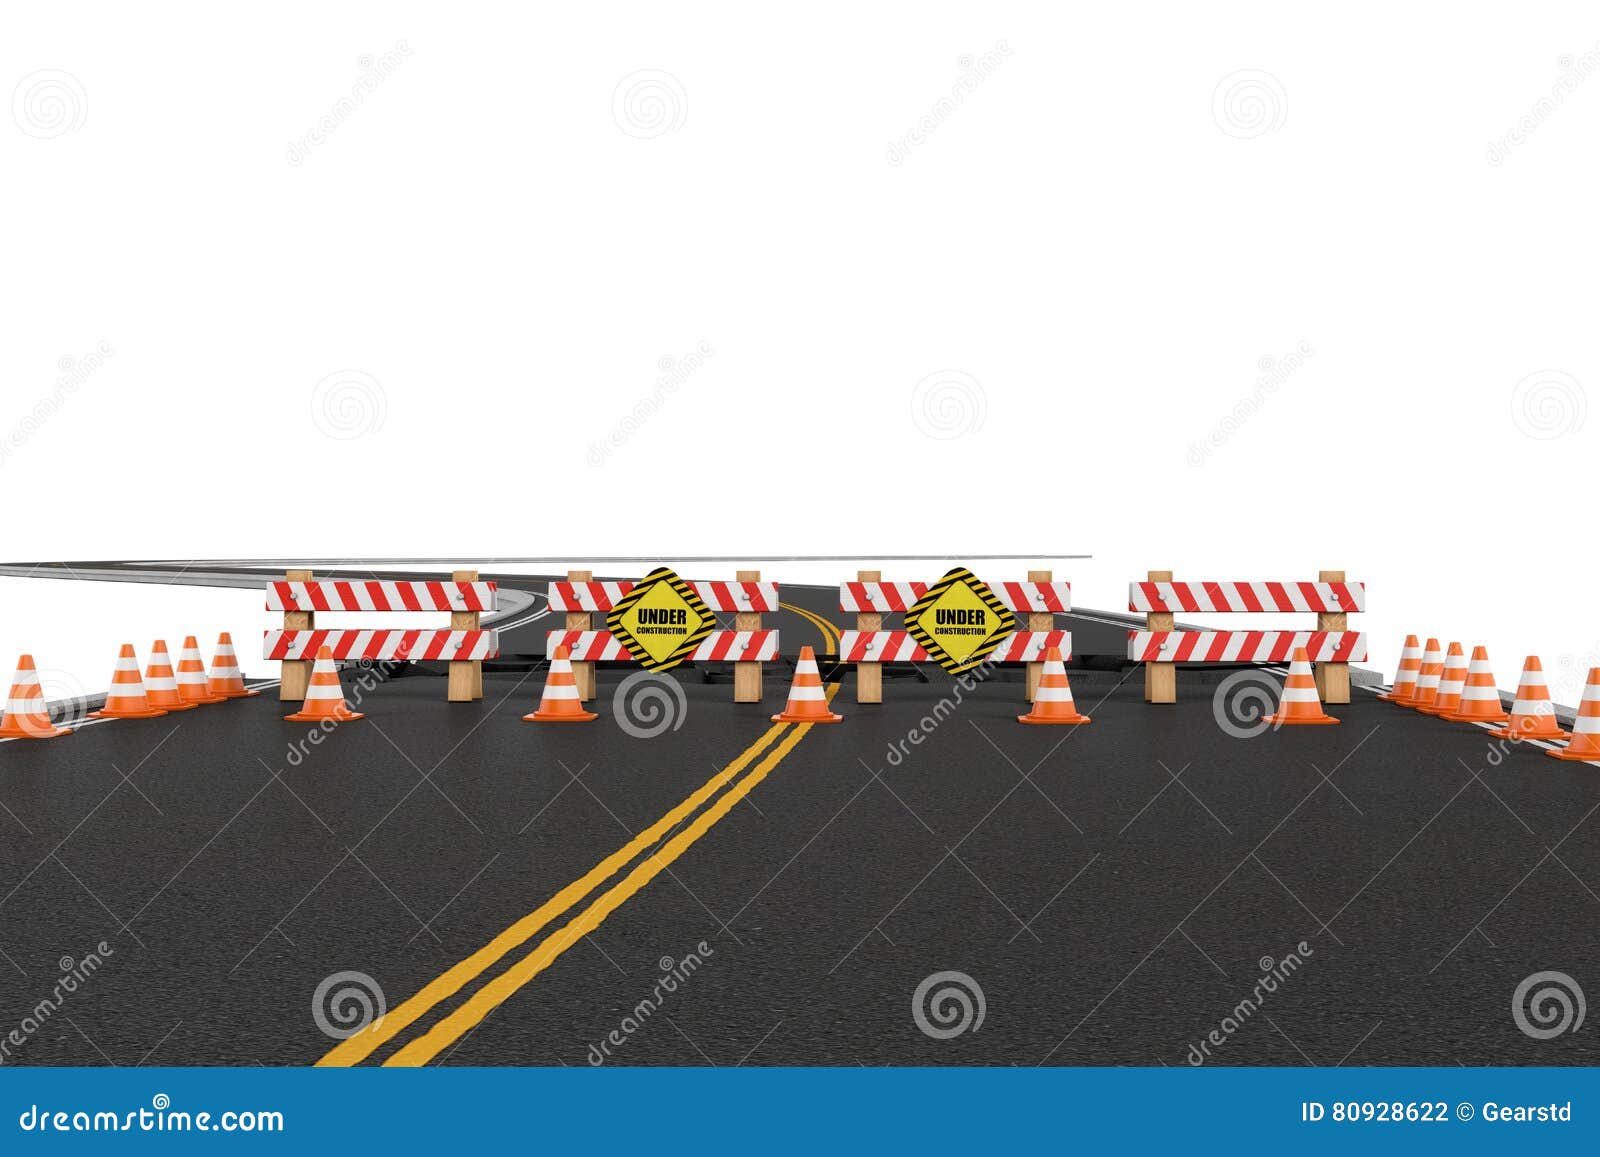 rendering of road closed with barriers, traffic cones and caution signs due to roadworks diversion.